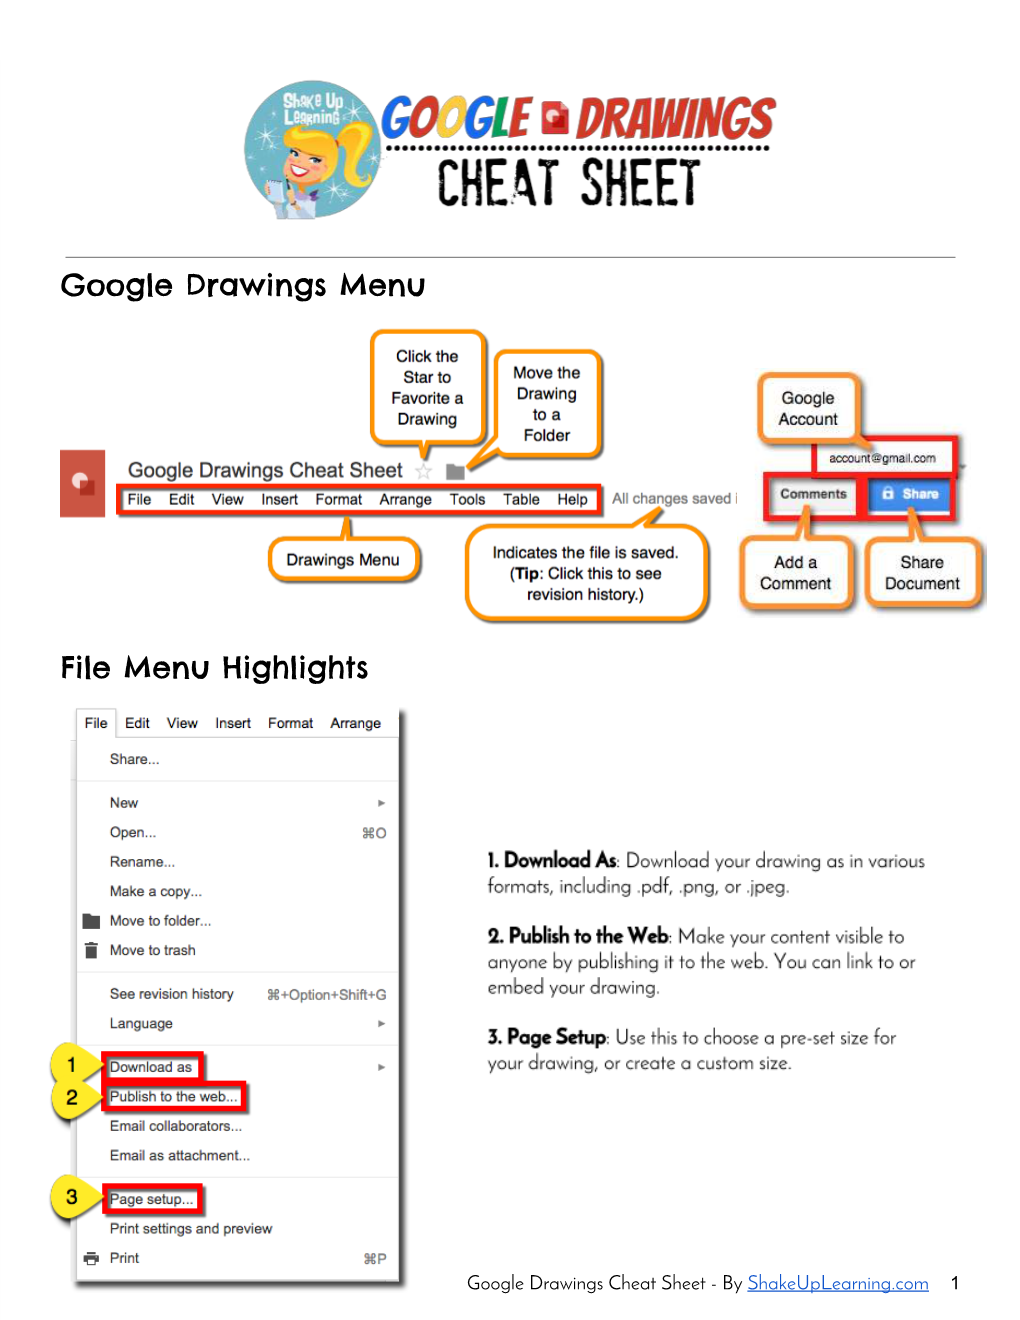 To Download the Google Drawings Cheat Sheet